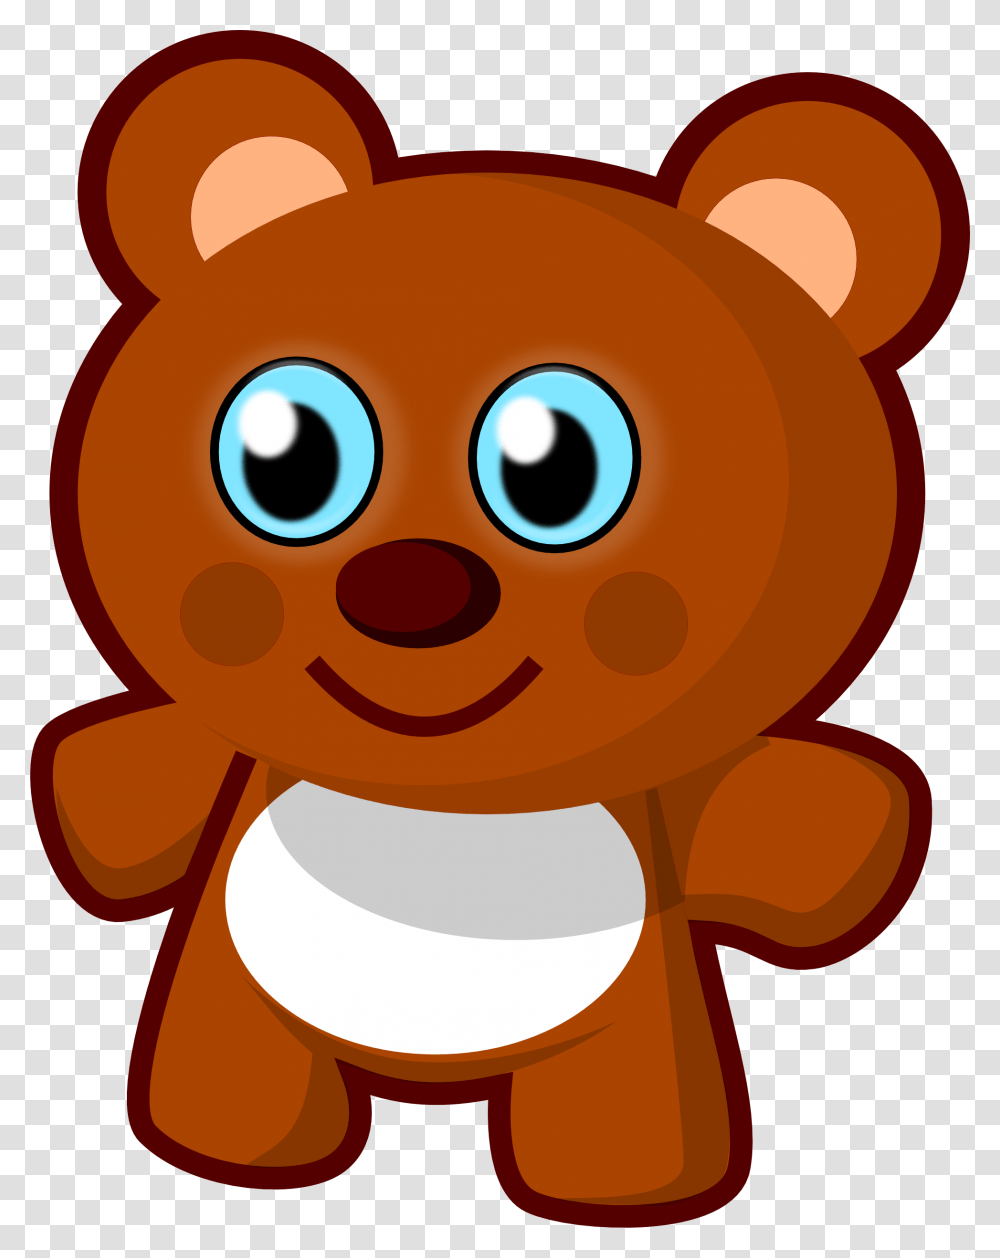 Teddy Bear Toy Cartoon, Sweets, Food, Confectionery, Mascot Transparent Png